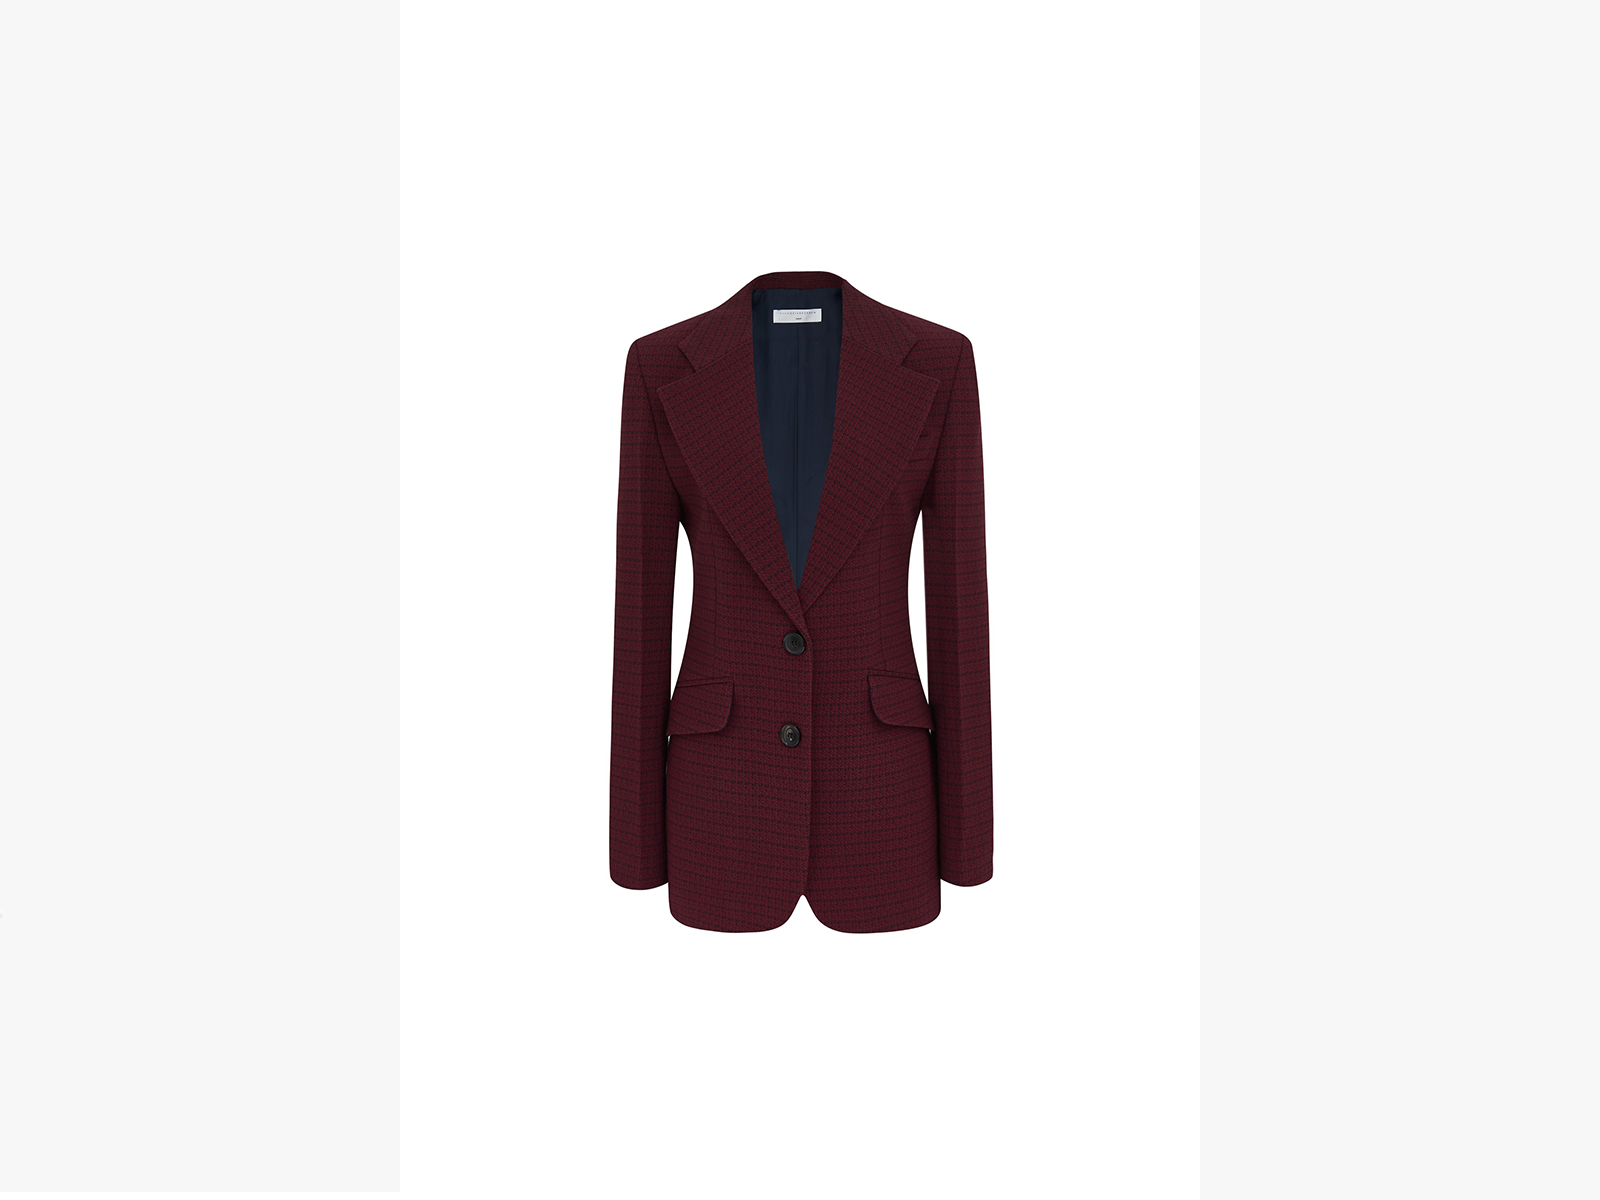 Victoria Beckham Jarvis Tailored Jacket in Bordeaux